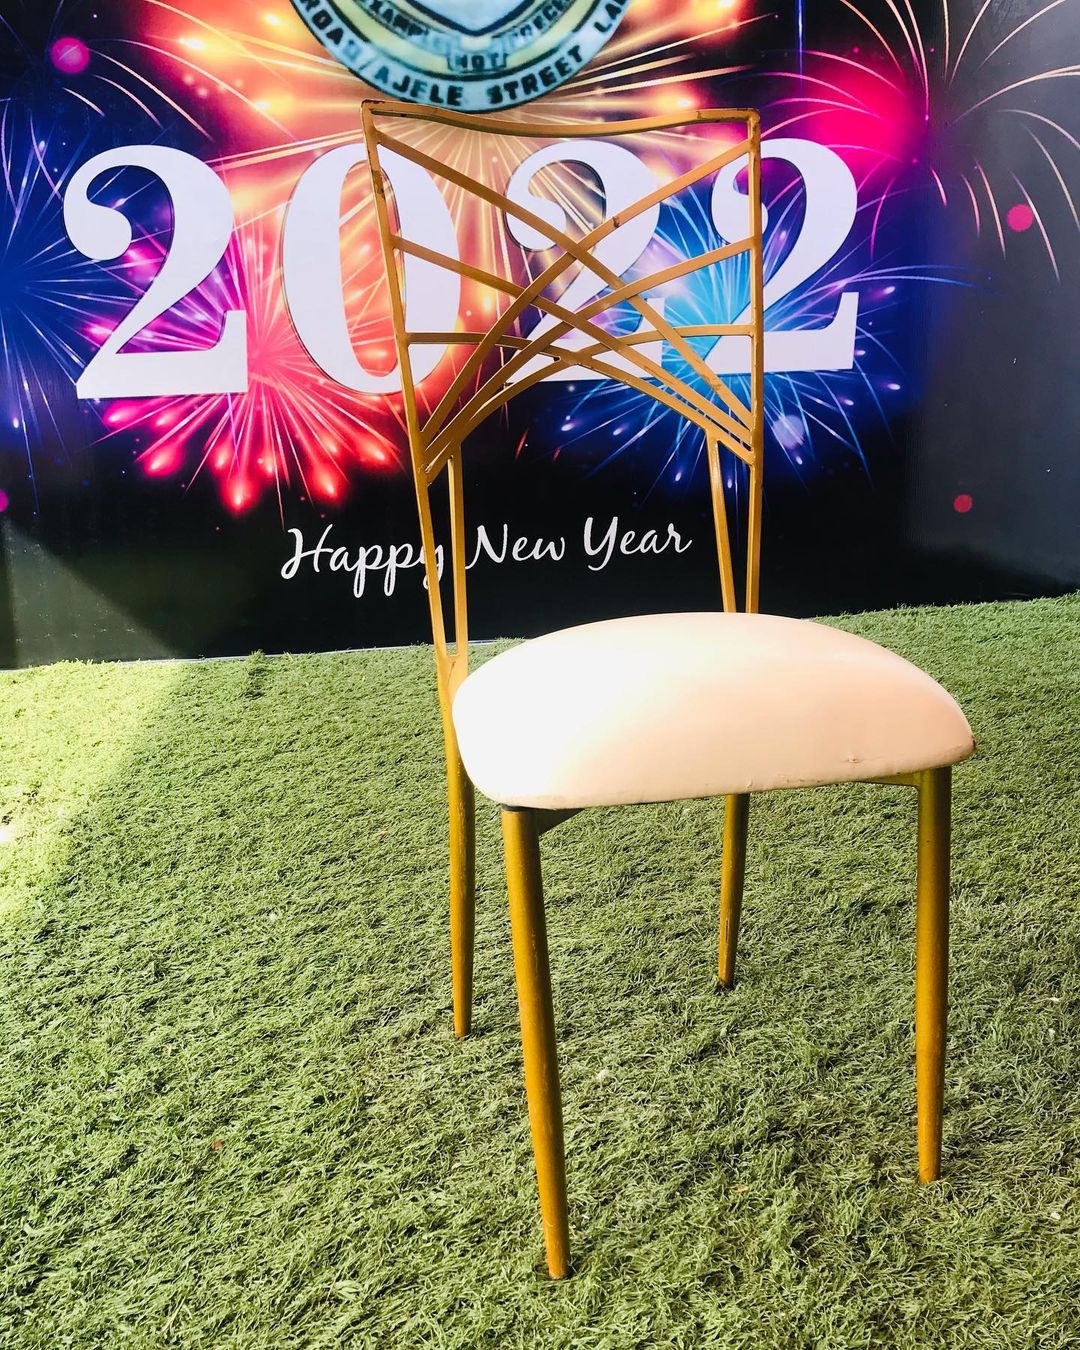 271611850 648720383207457 1132294735408313778 n - Our gold chameleon chair sitting elegantly. Not only are they very elegant but also offer a lot of c...